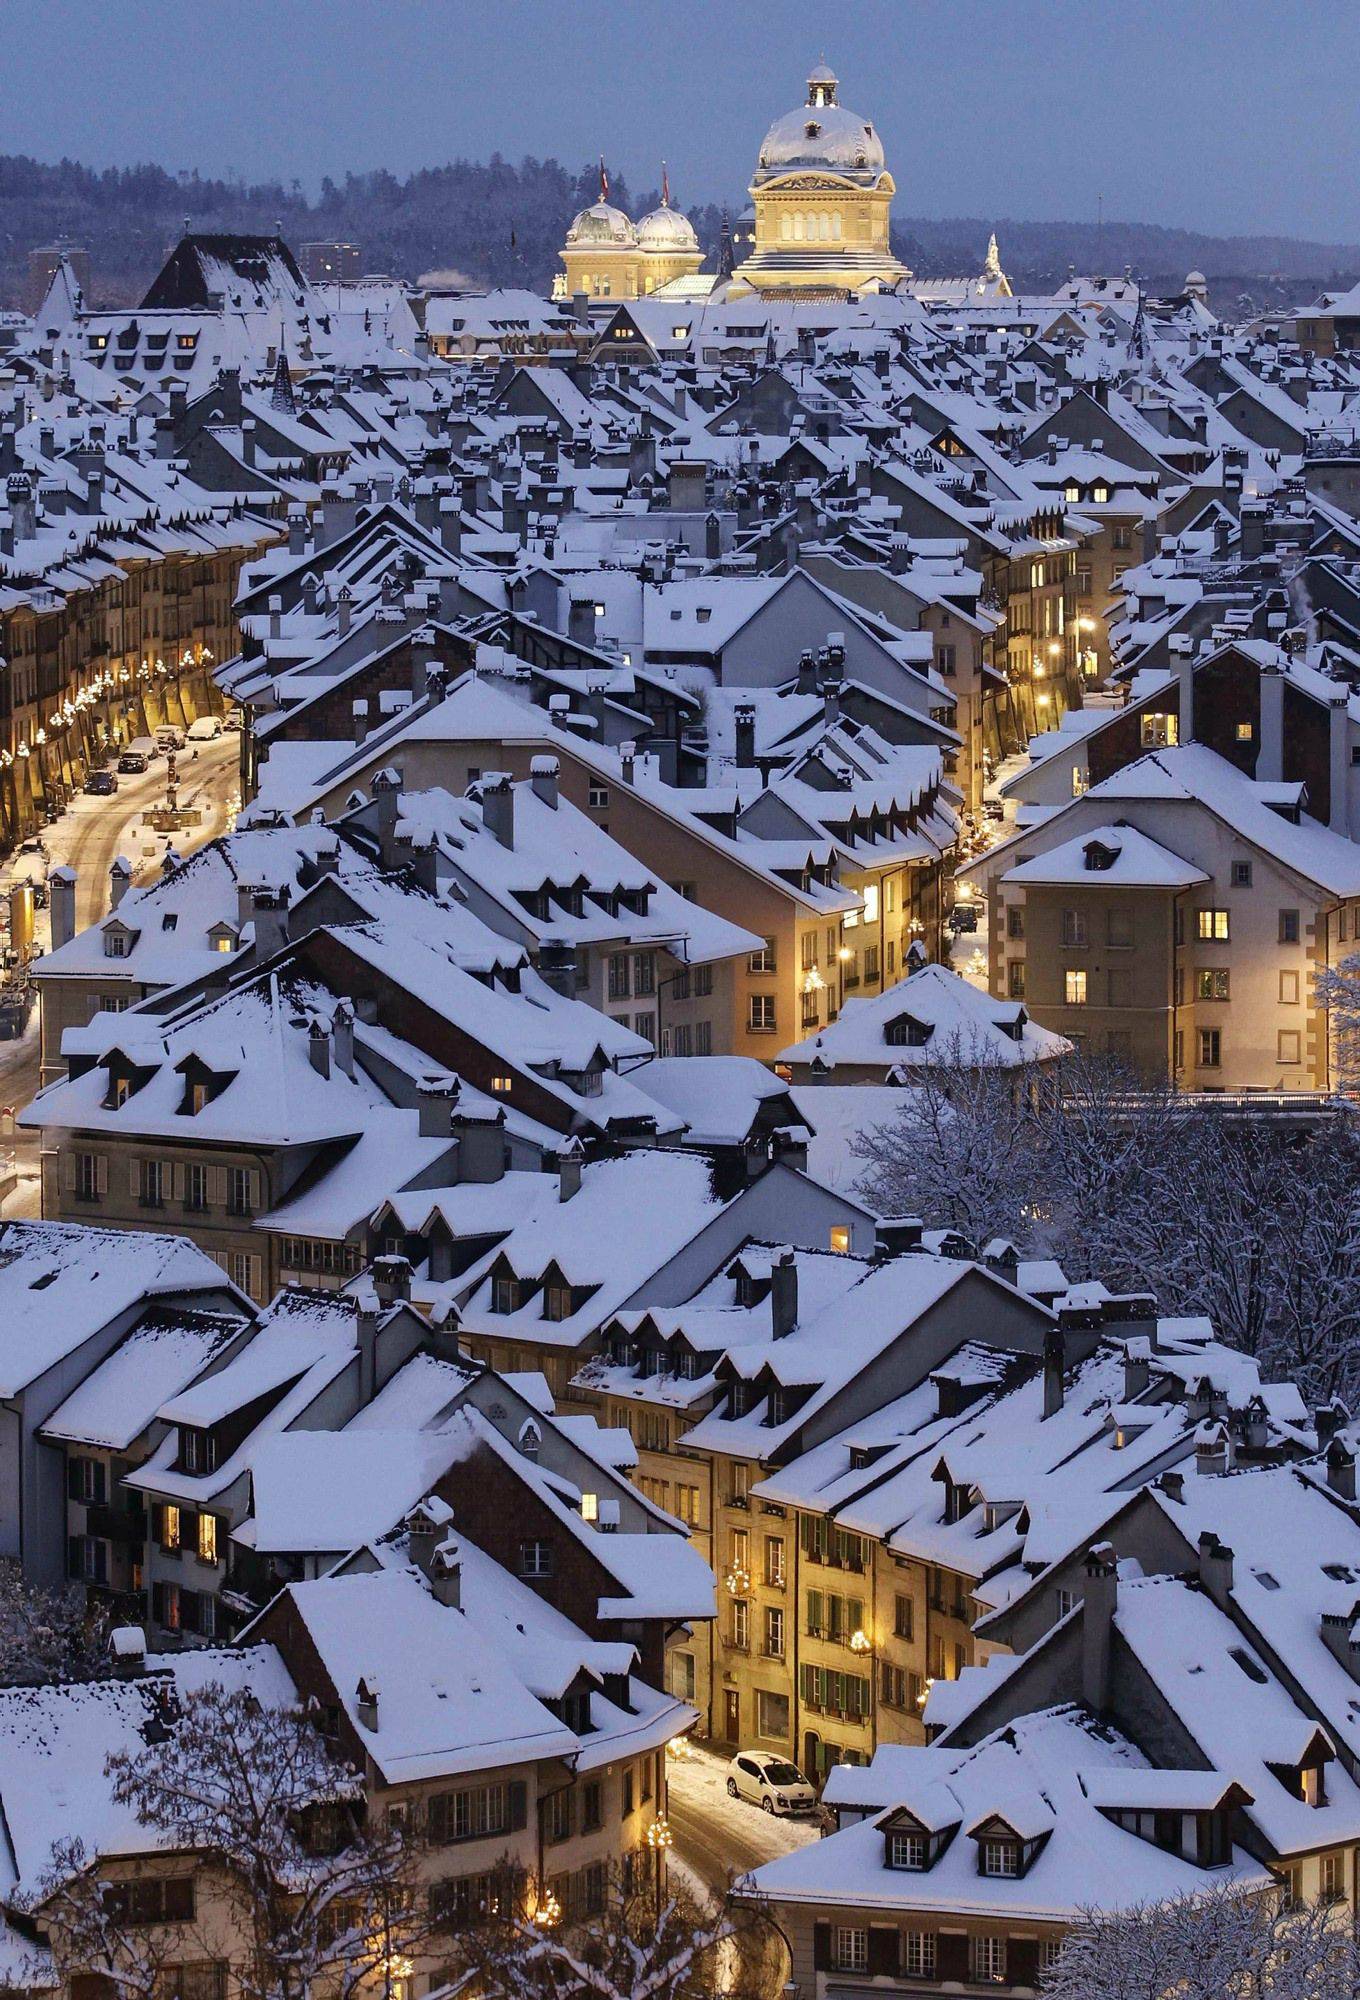 Awesome-Image-of-Winter-in-Bern-Switzerland